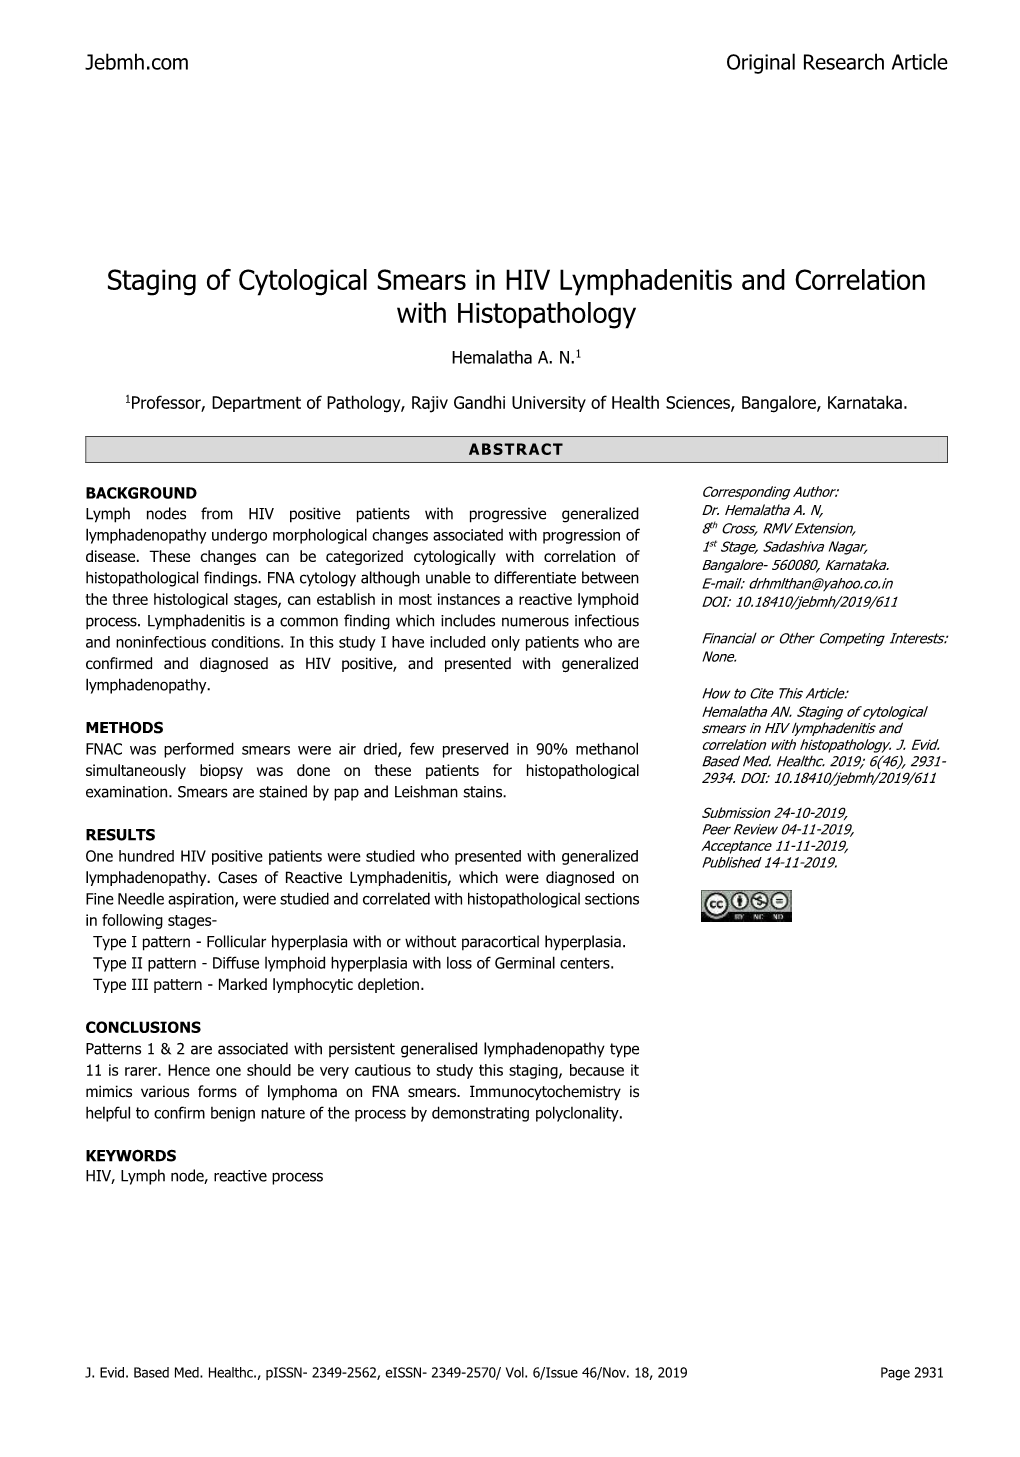 Staging of Cytological Smears in HIV Lymphadenitis and Correlation with Histopathology